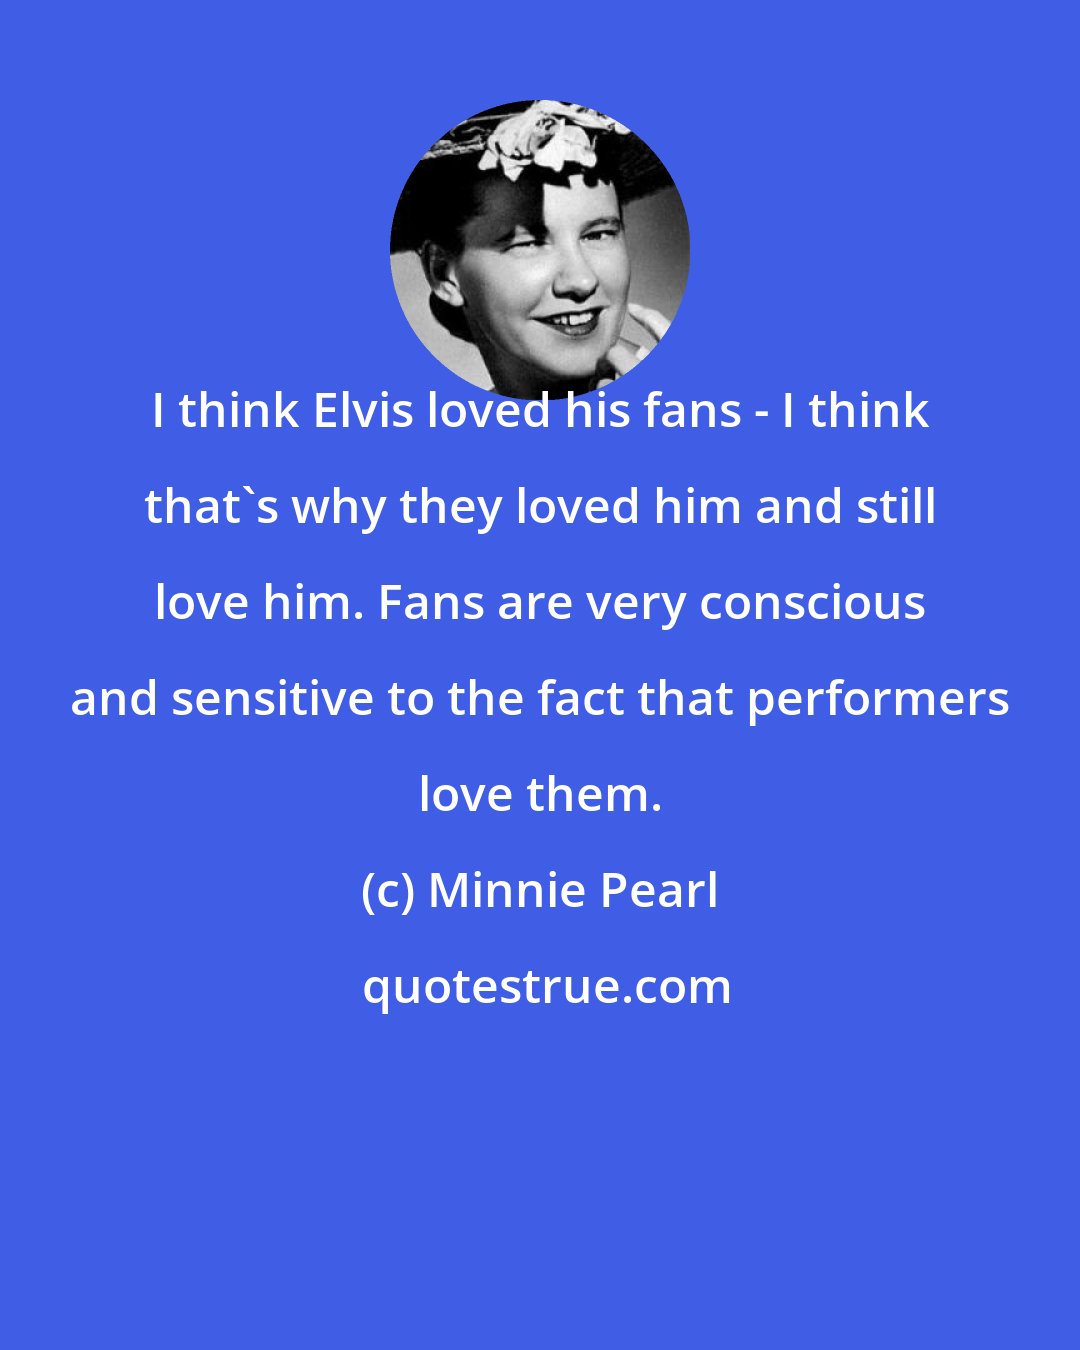 Minnie Pearl: I think Elvis loved his fans - I think that's why they loved him and still love him. Fans are very conscious and sensitive to the fact that performers love them.